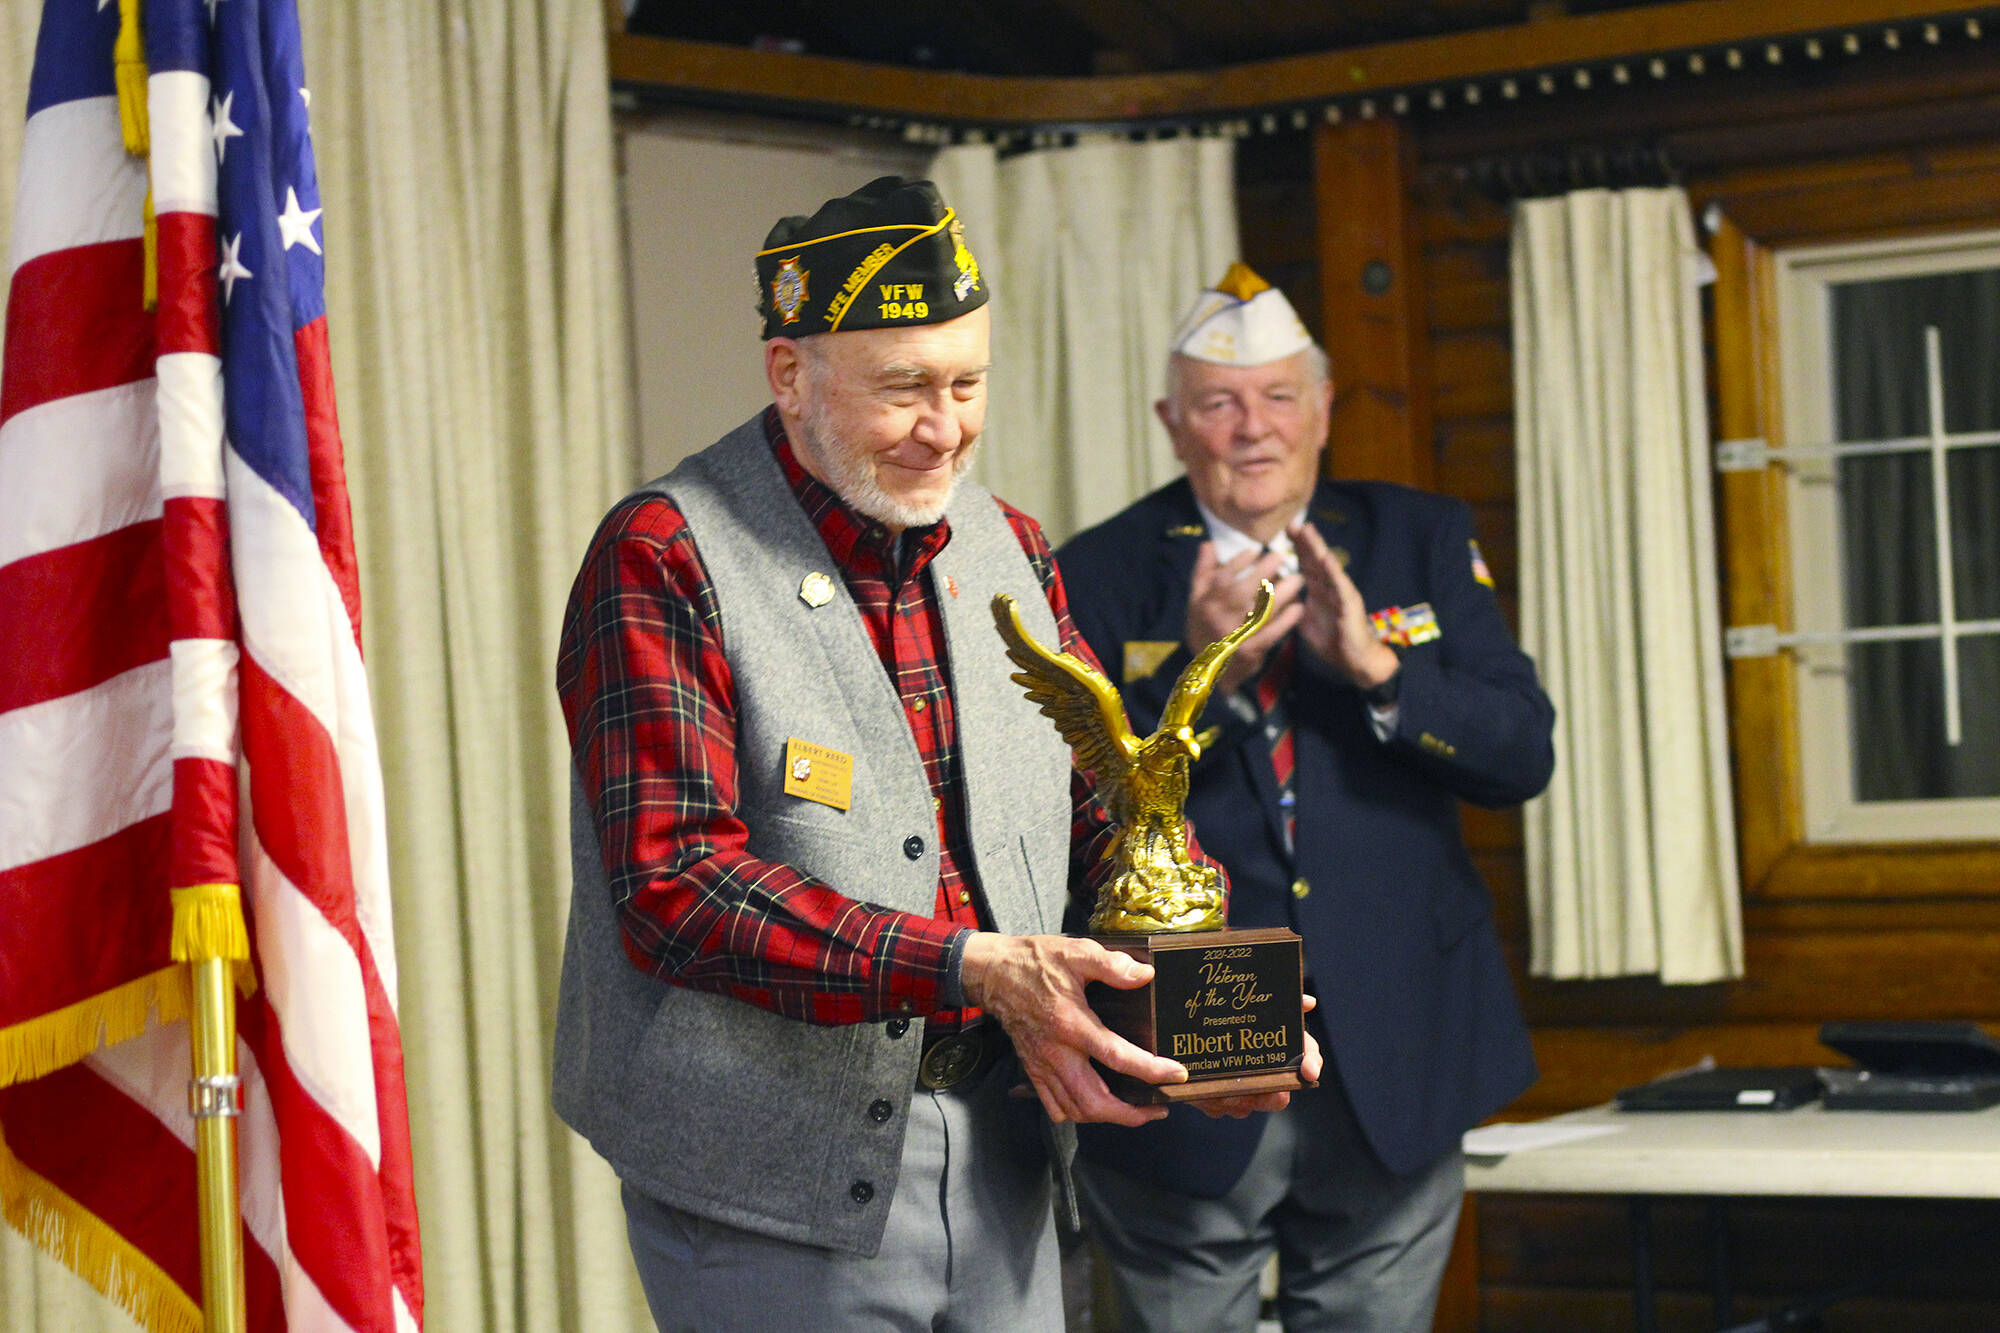 VFW member Elbert Reed was honored as Veteran of the Year. Photo by Ray Miller-Still